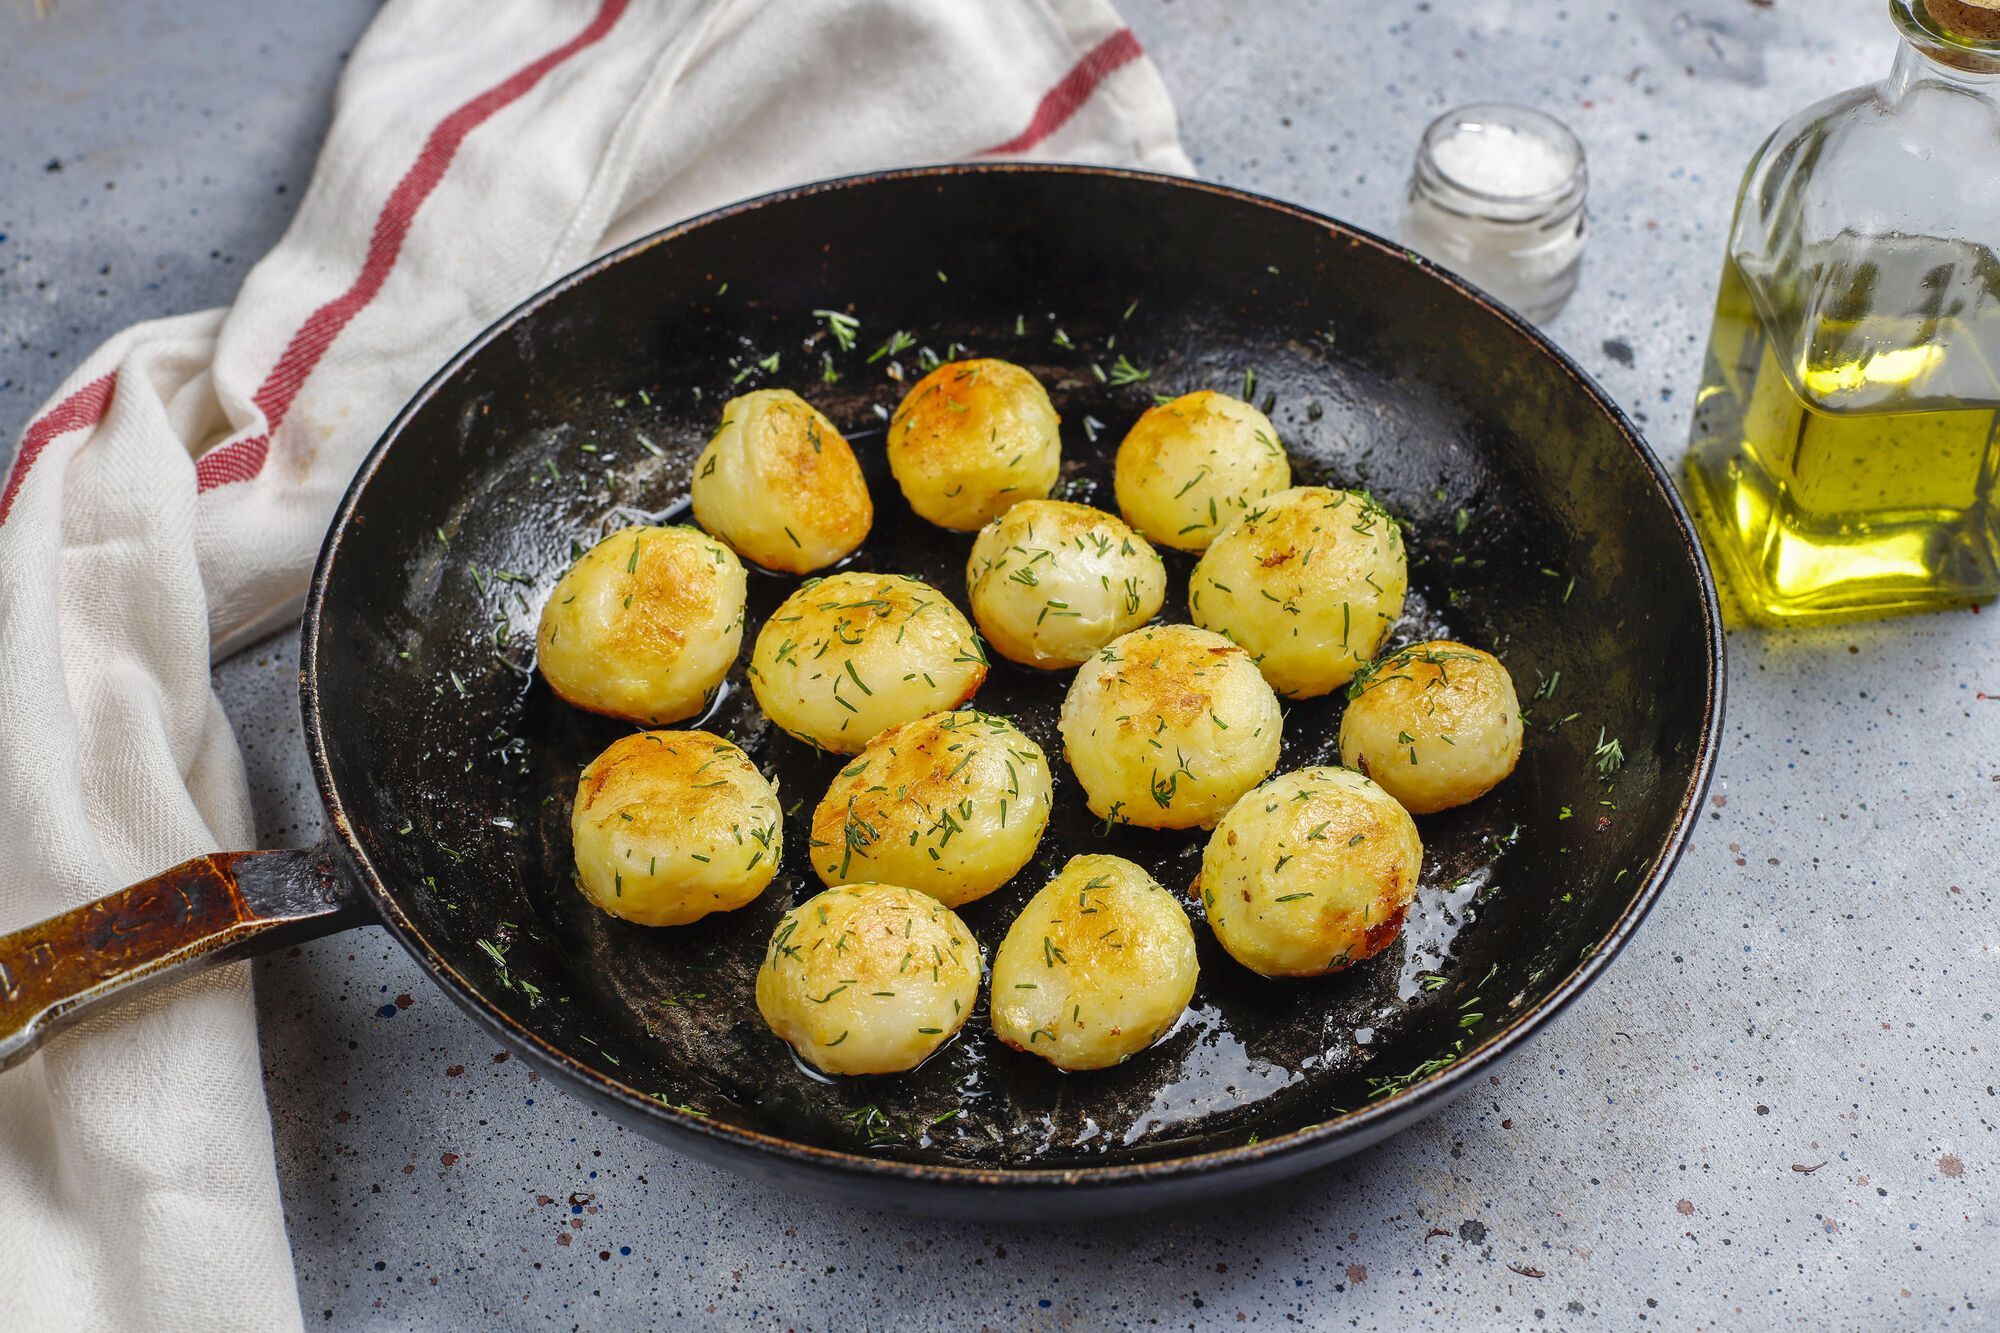 How to cook potatoes deliciously